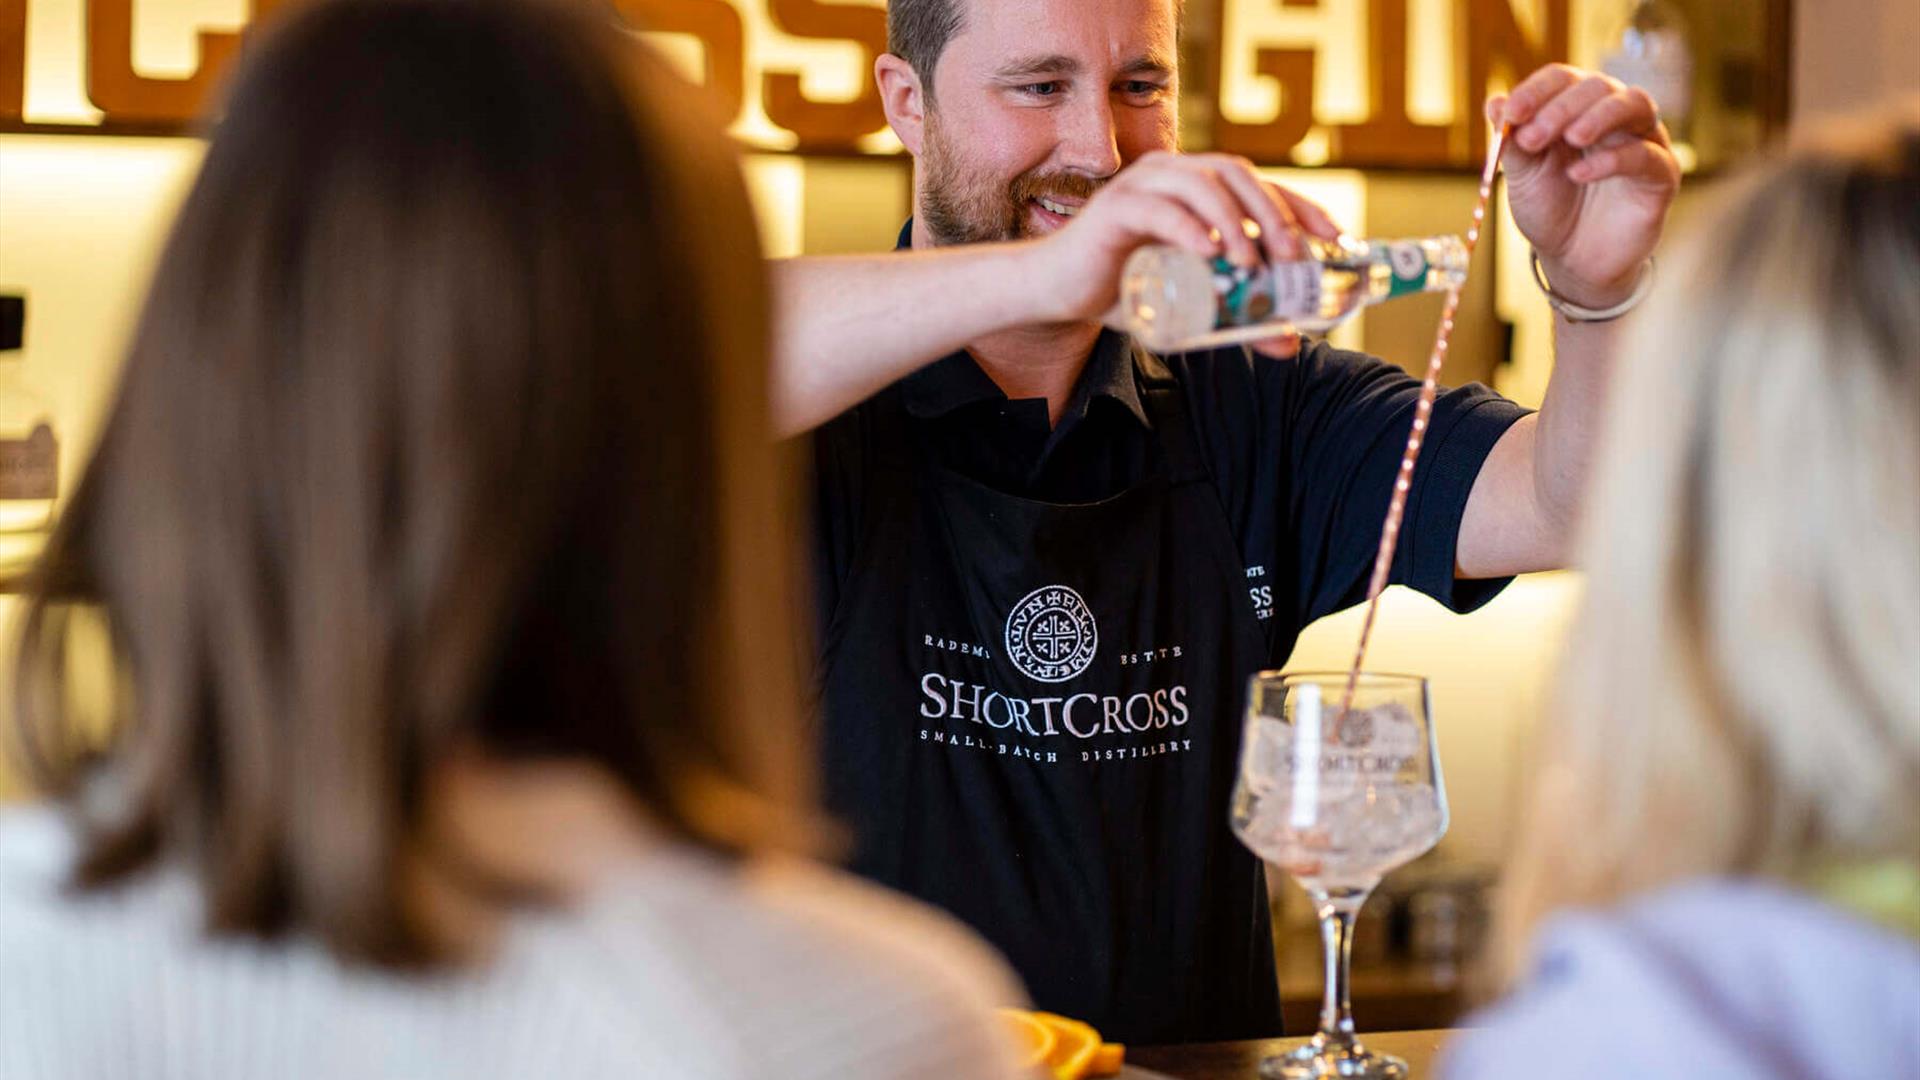 The gin tour includes learning how to pour the perfect gin and tonic at the on-site bar in Rademon Estate